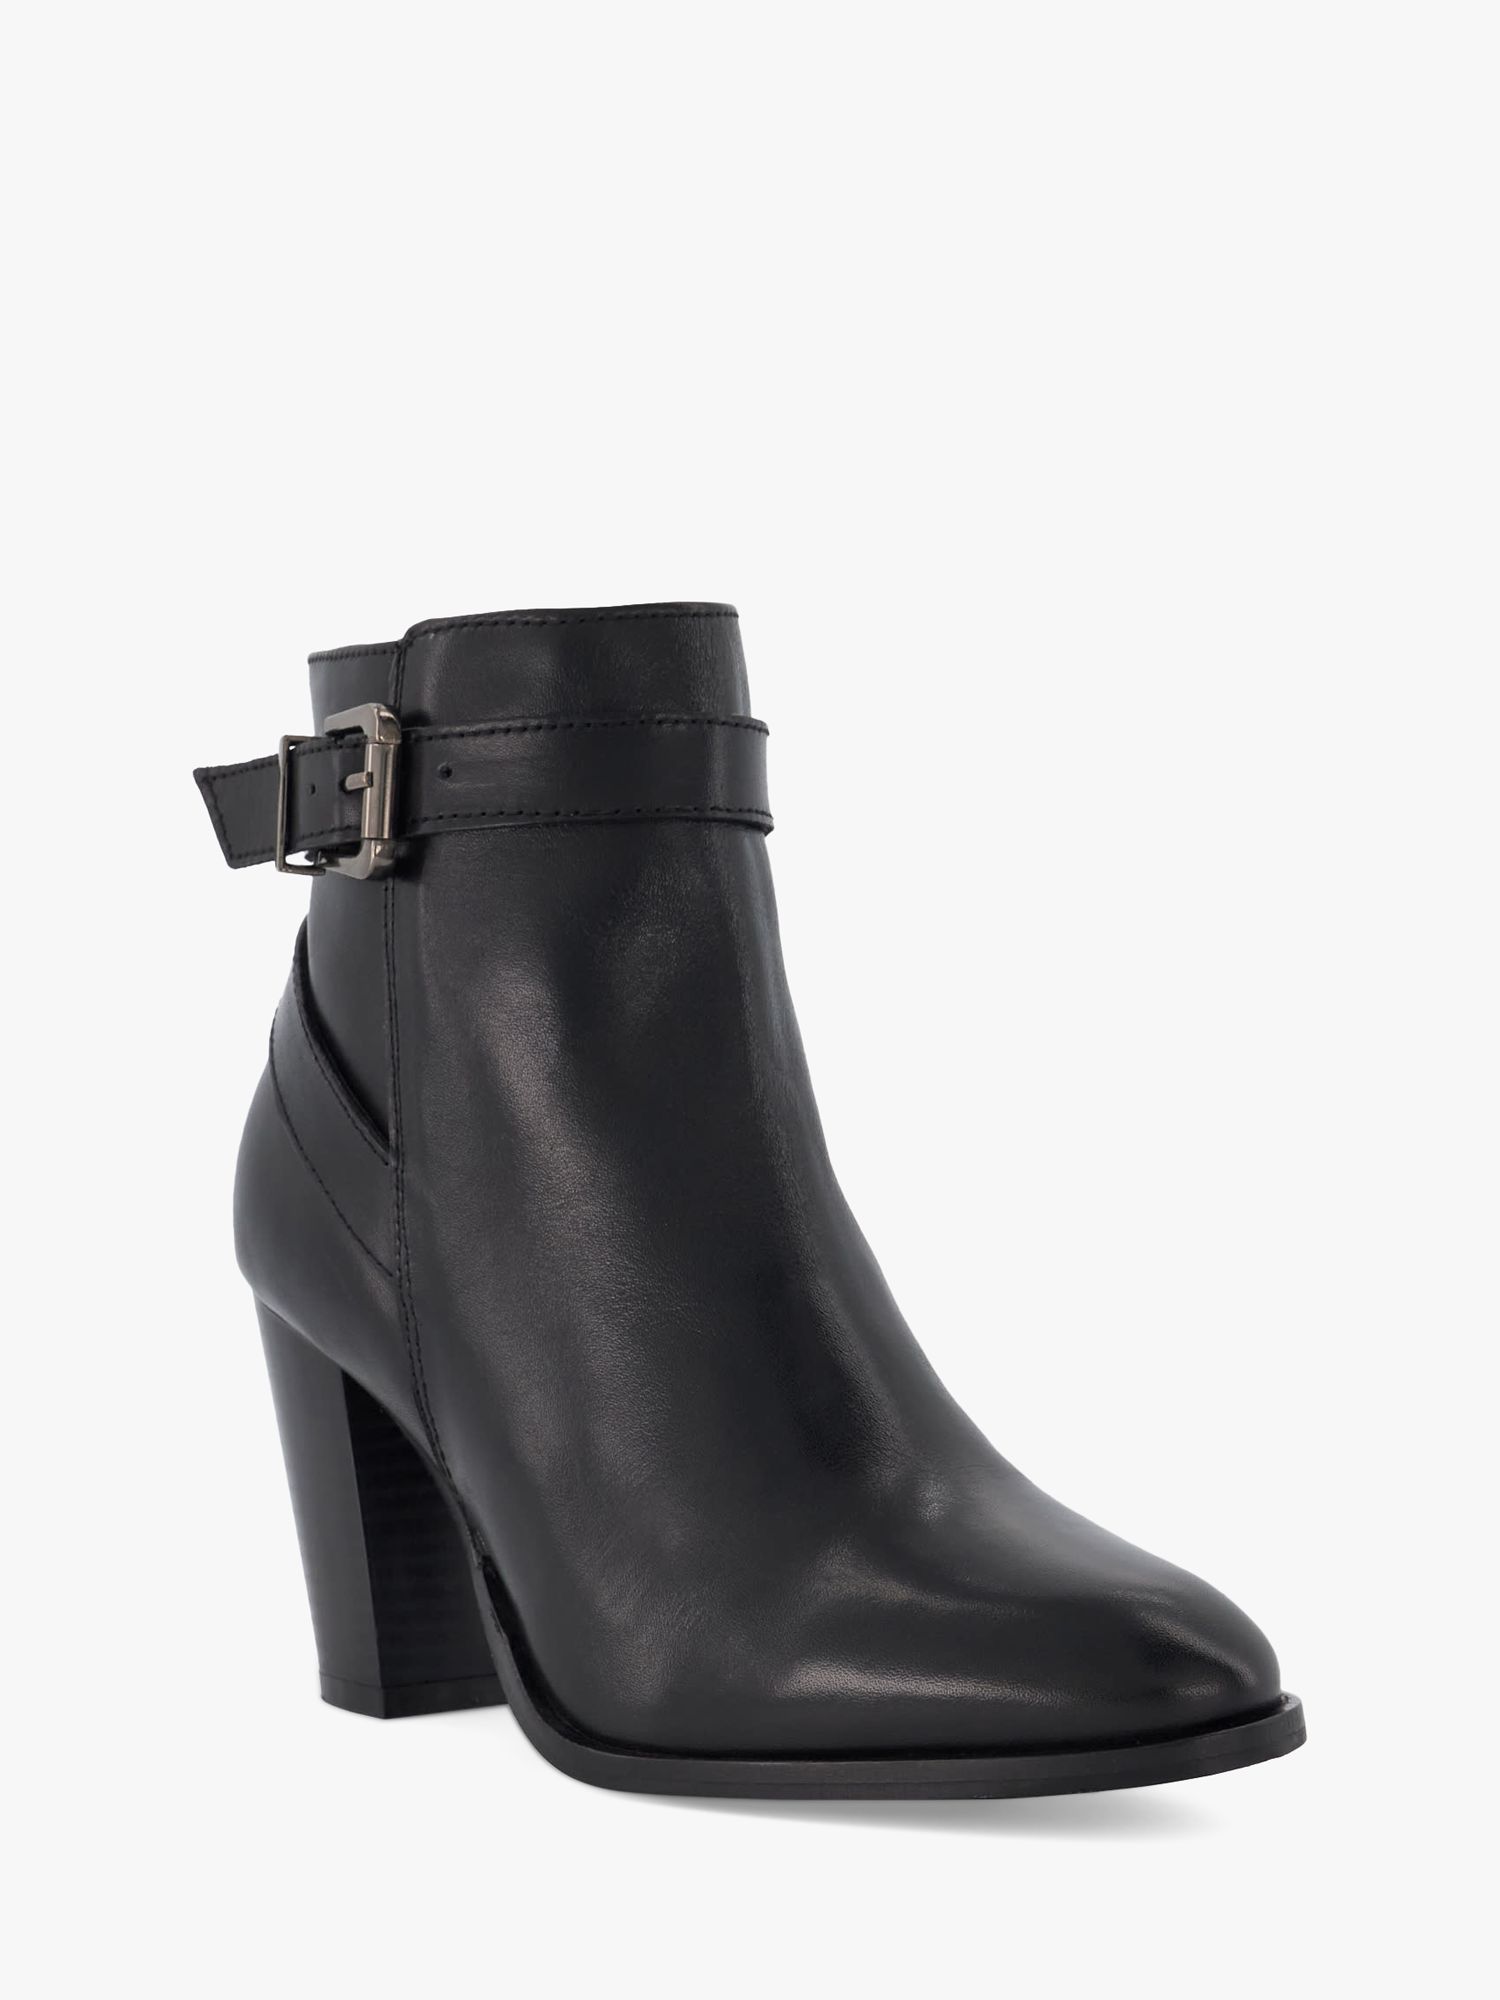 Dune Philippa 2 Leather Block Heel Ankle Boots, Black-leather at John ...